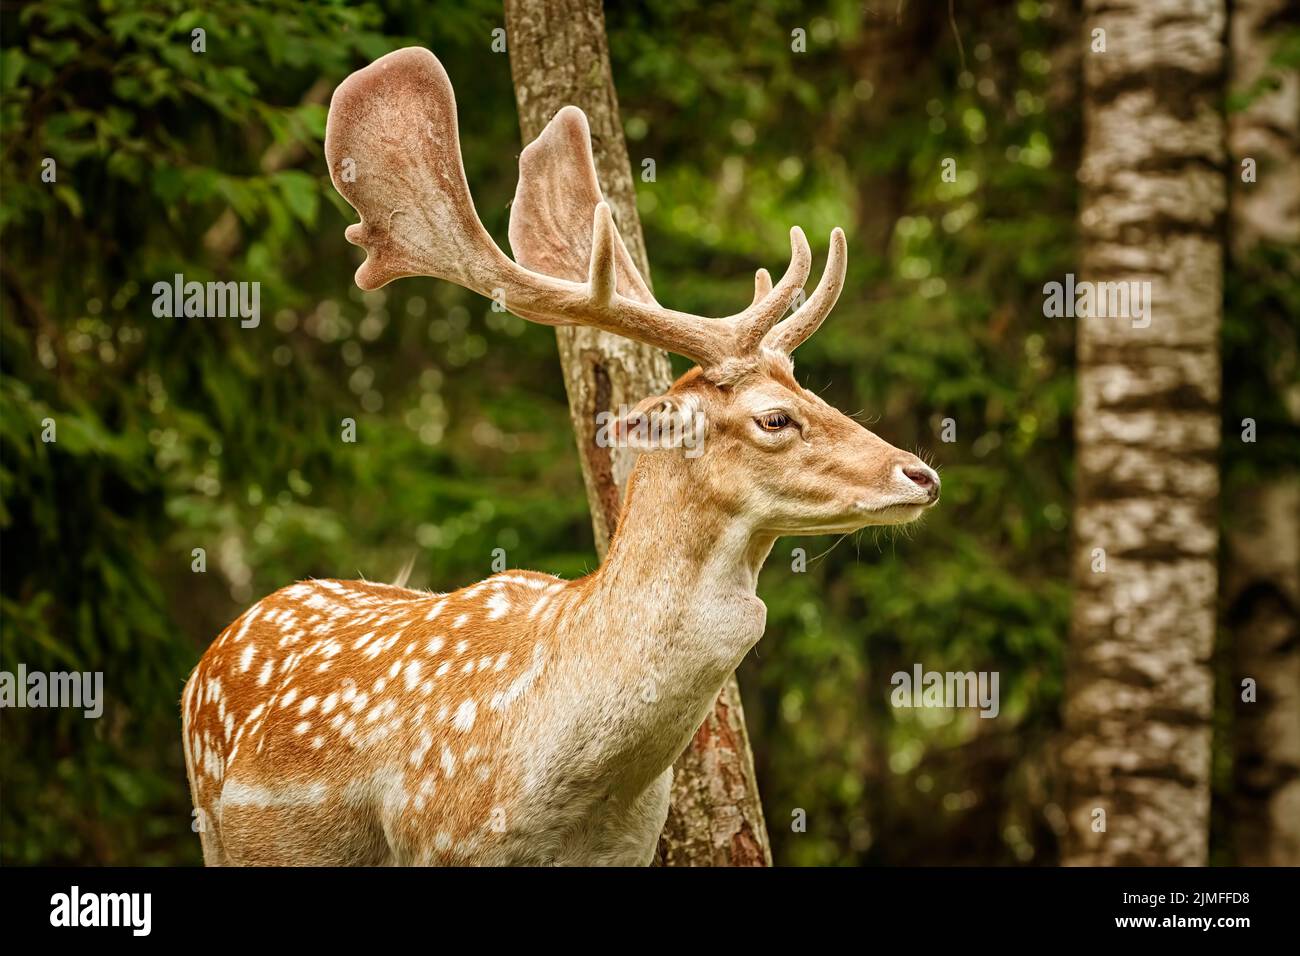 Deers with big horns near the forest Stock Photo